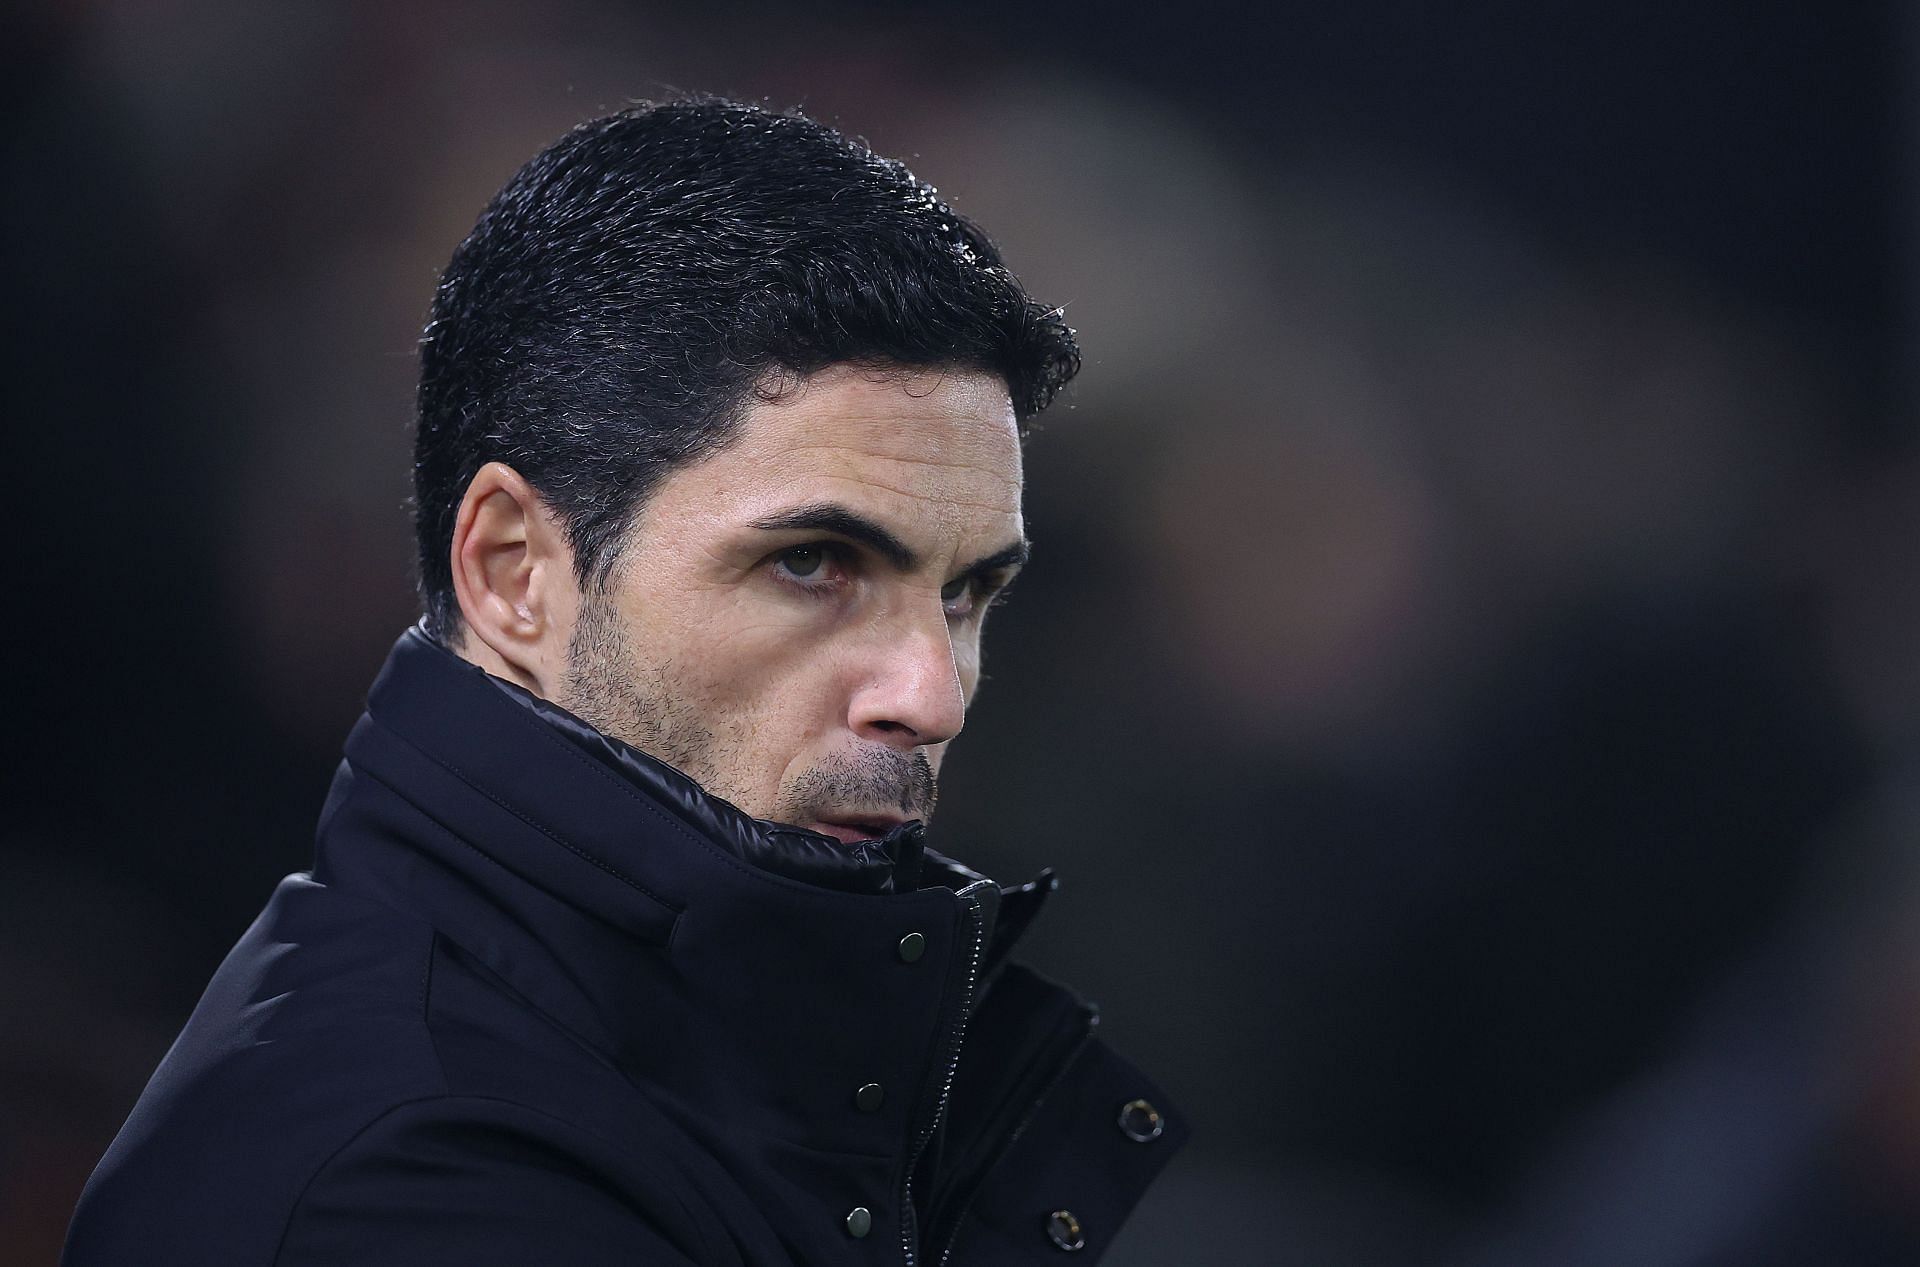 Mikel Arteta for Arsenal (via Getty Images)